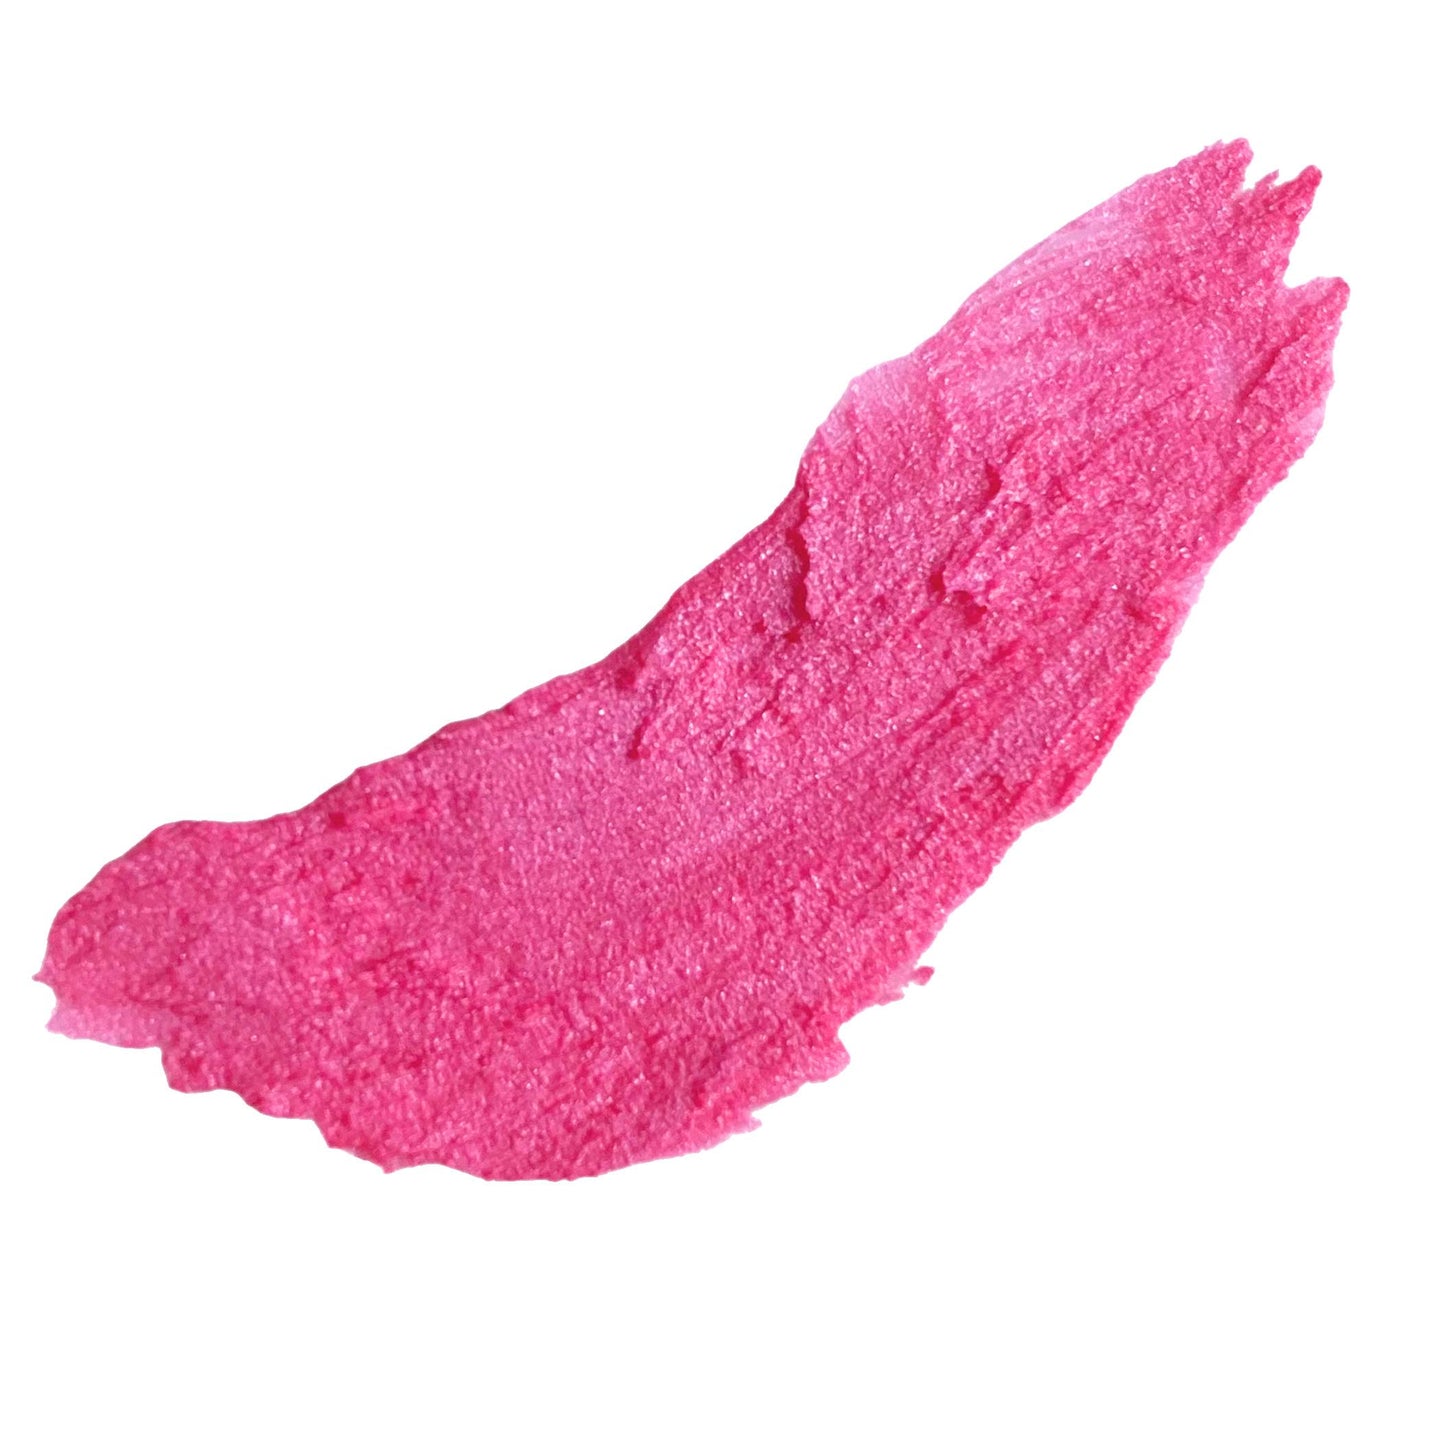 bright pink gives the lips frosty look tinted lip balm smear on white background